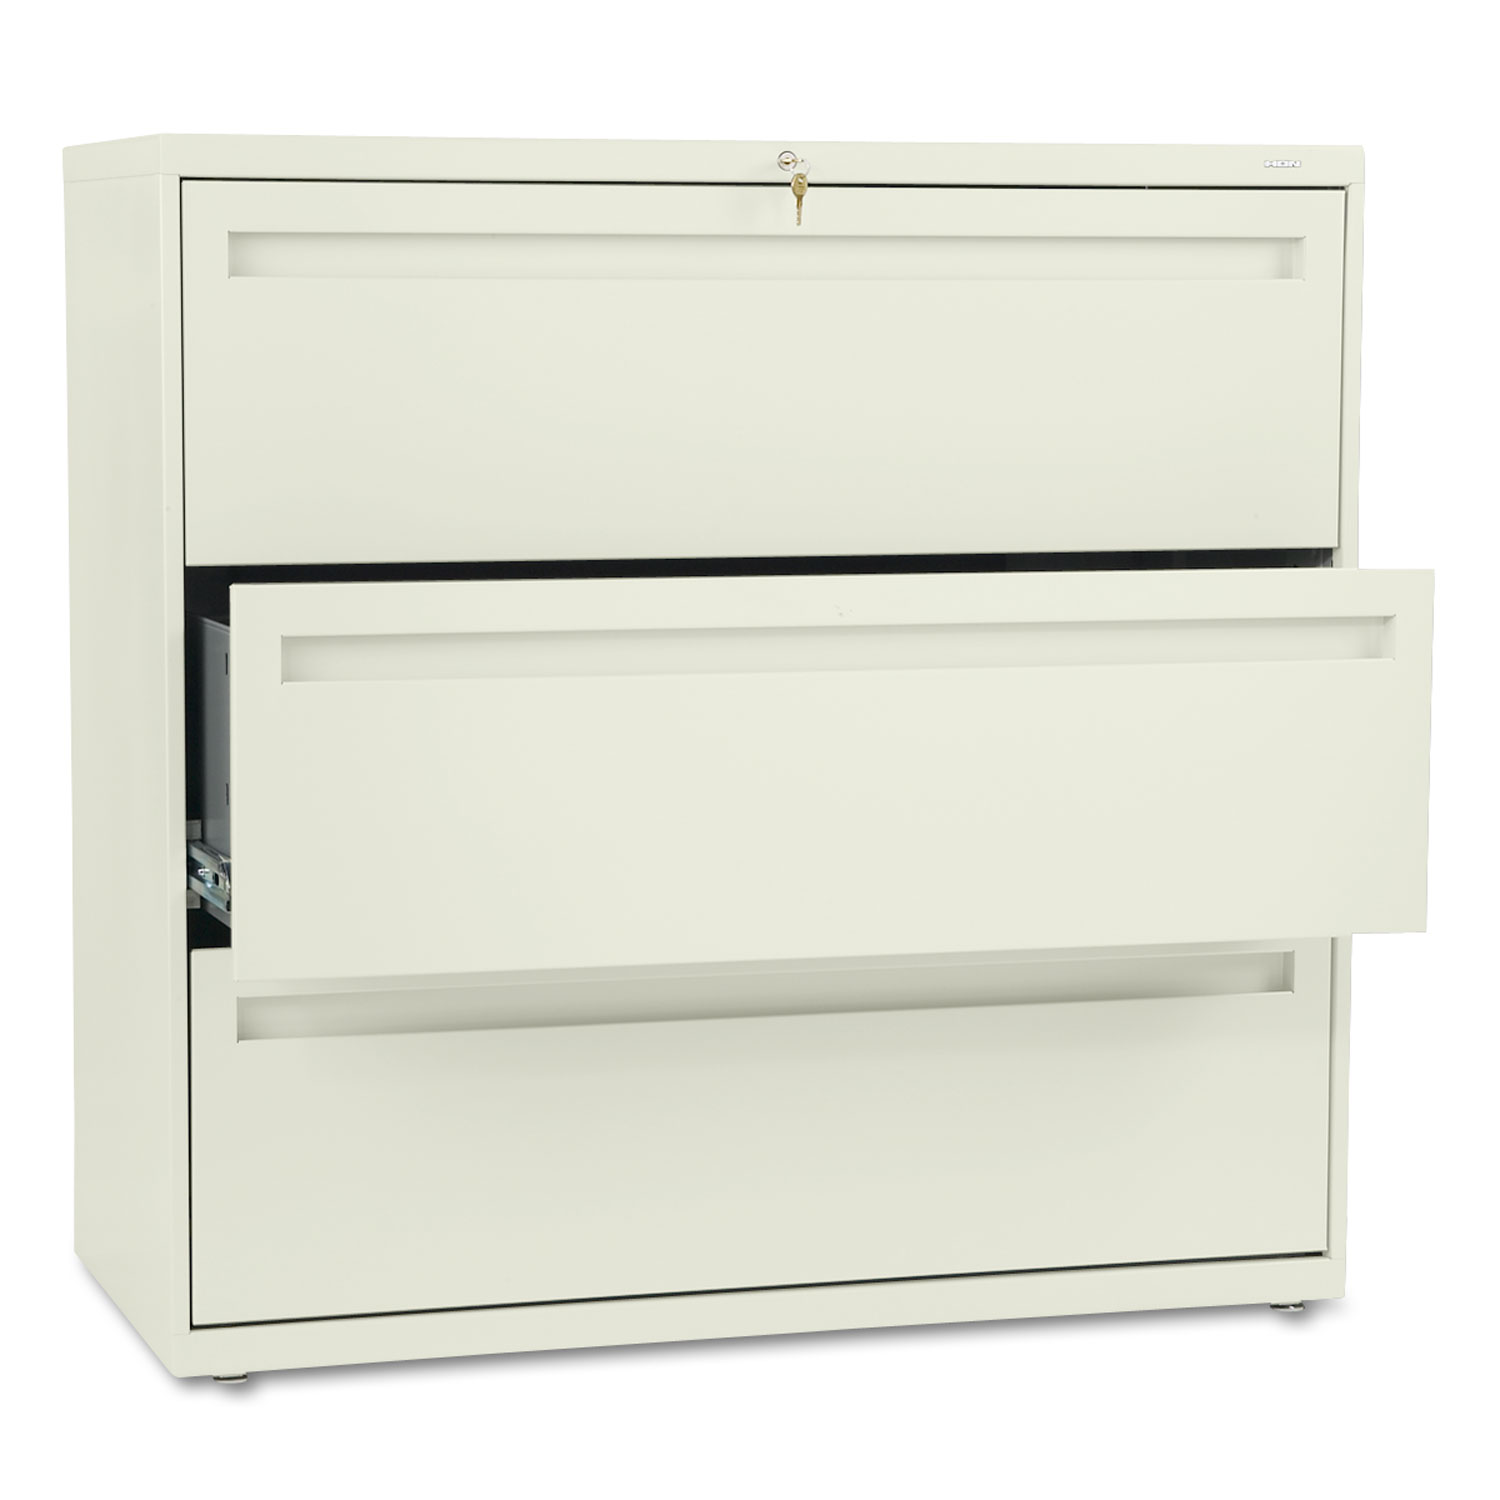 700 Series Three-Drawer Lateral File, 42w x 19-1/4d, Putty